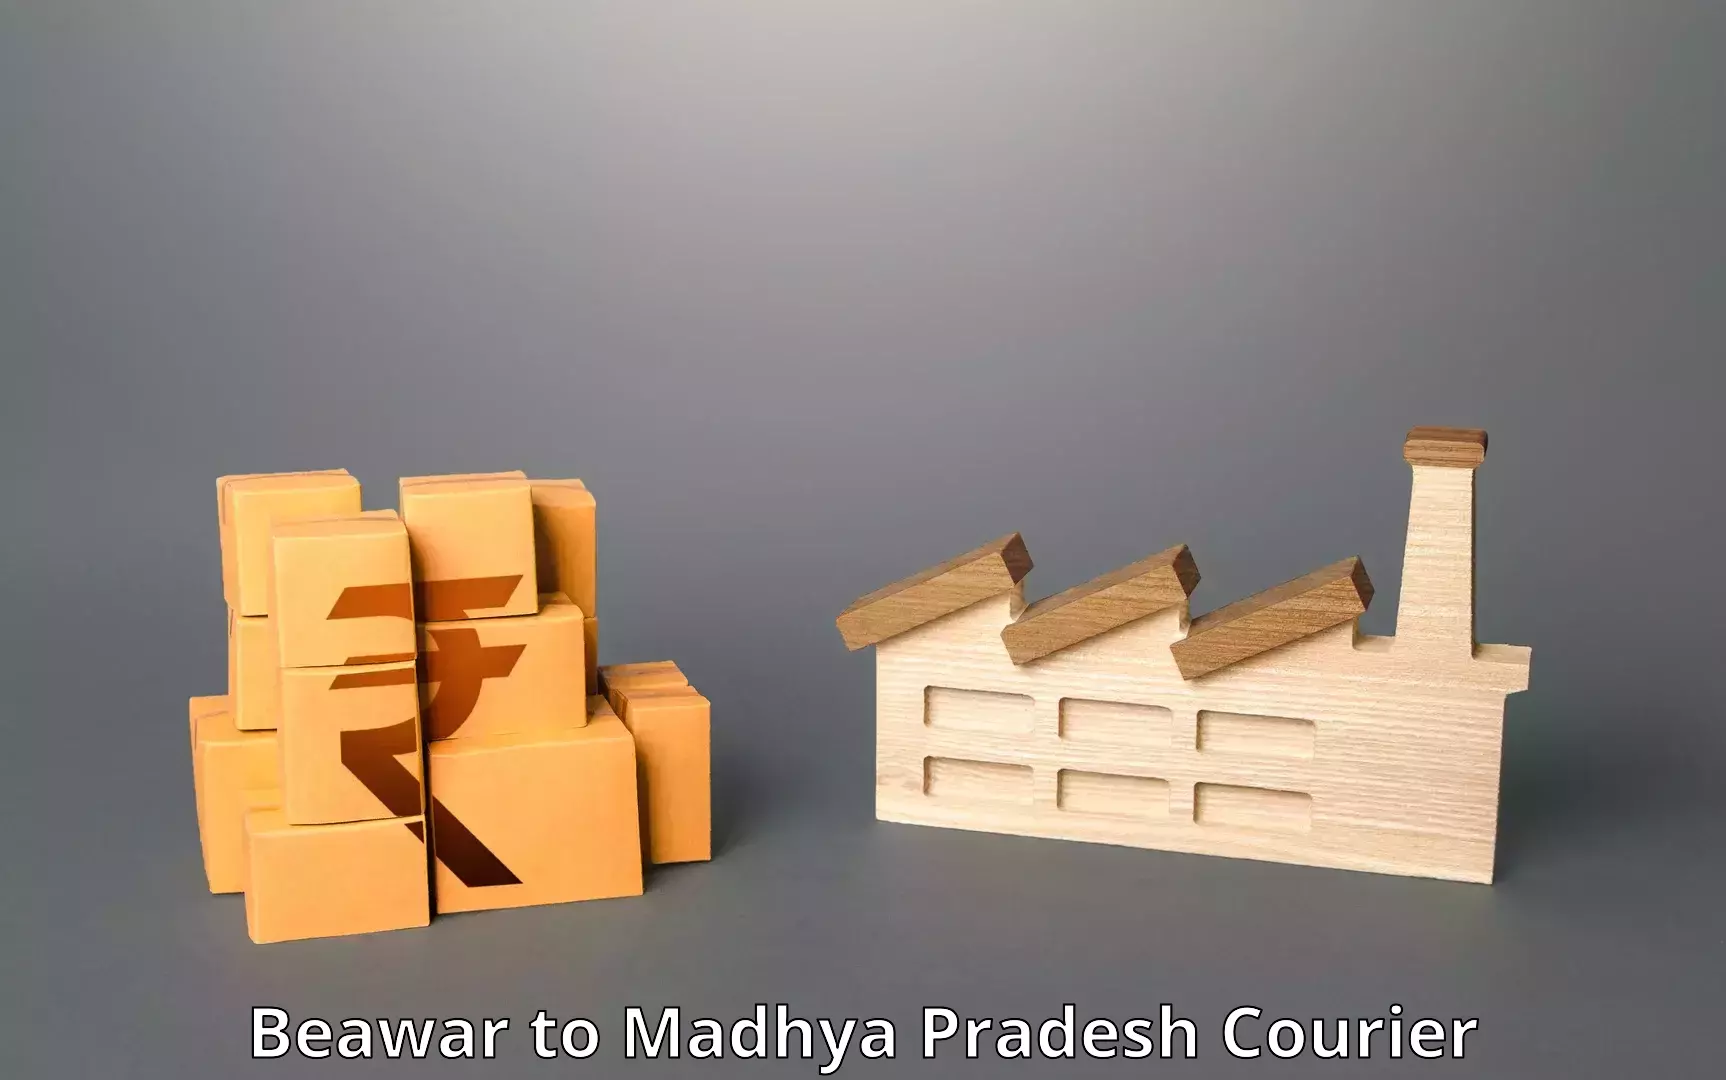 Express courier capabilities in Beawar to Madwas